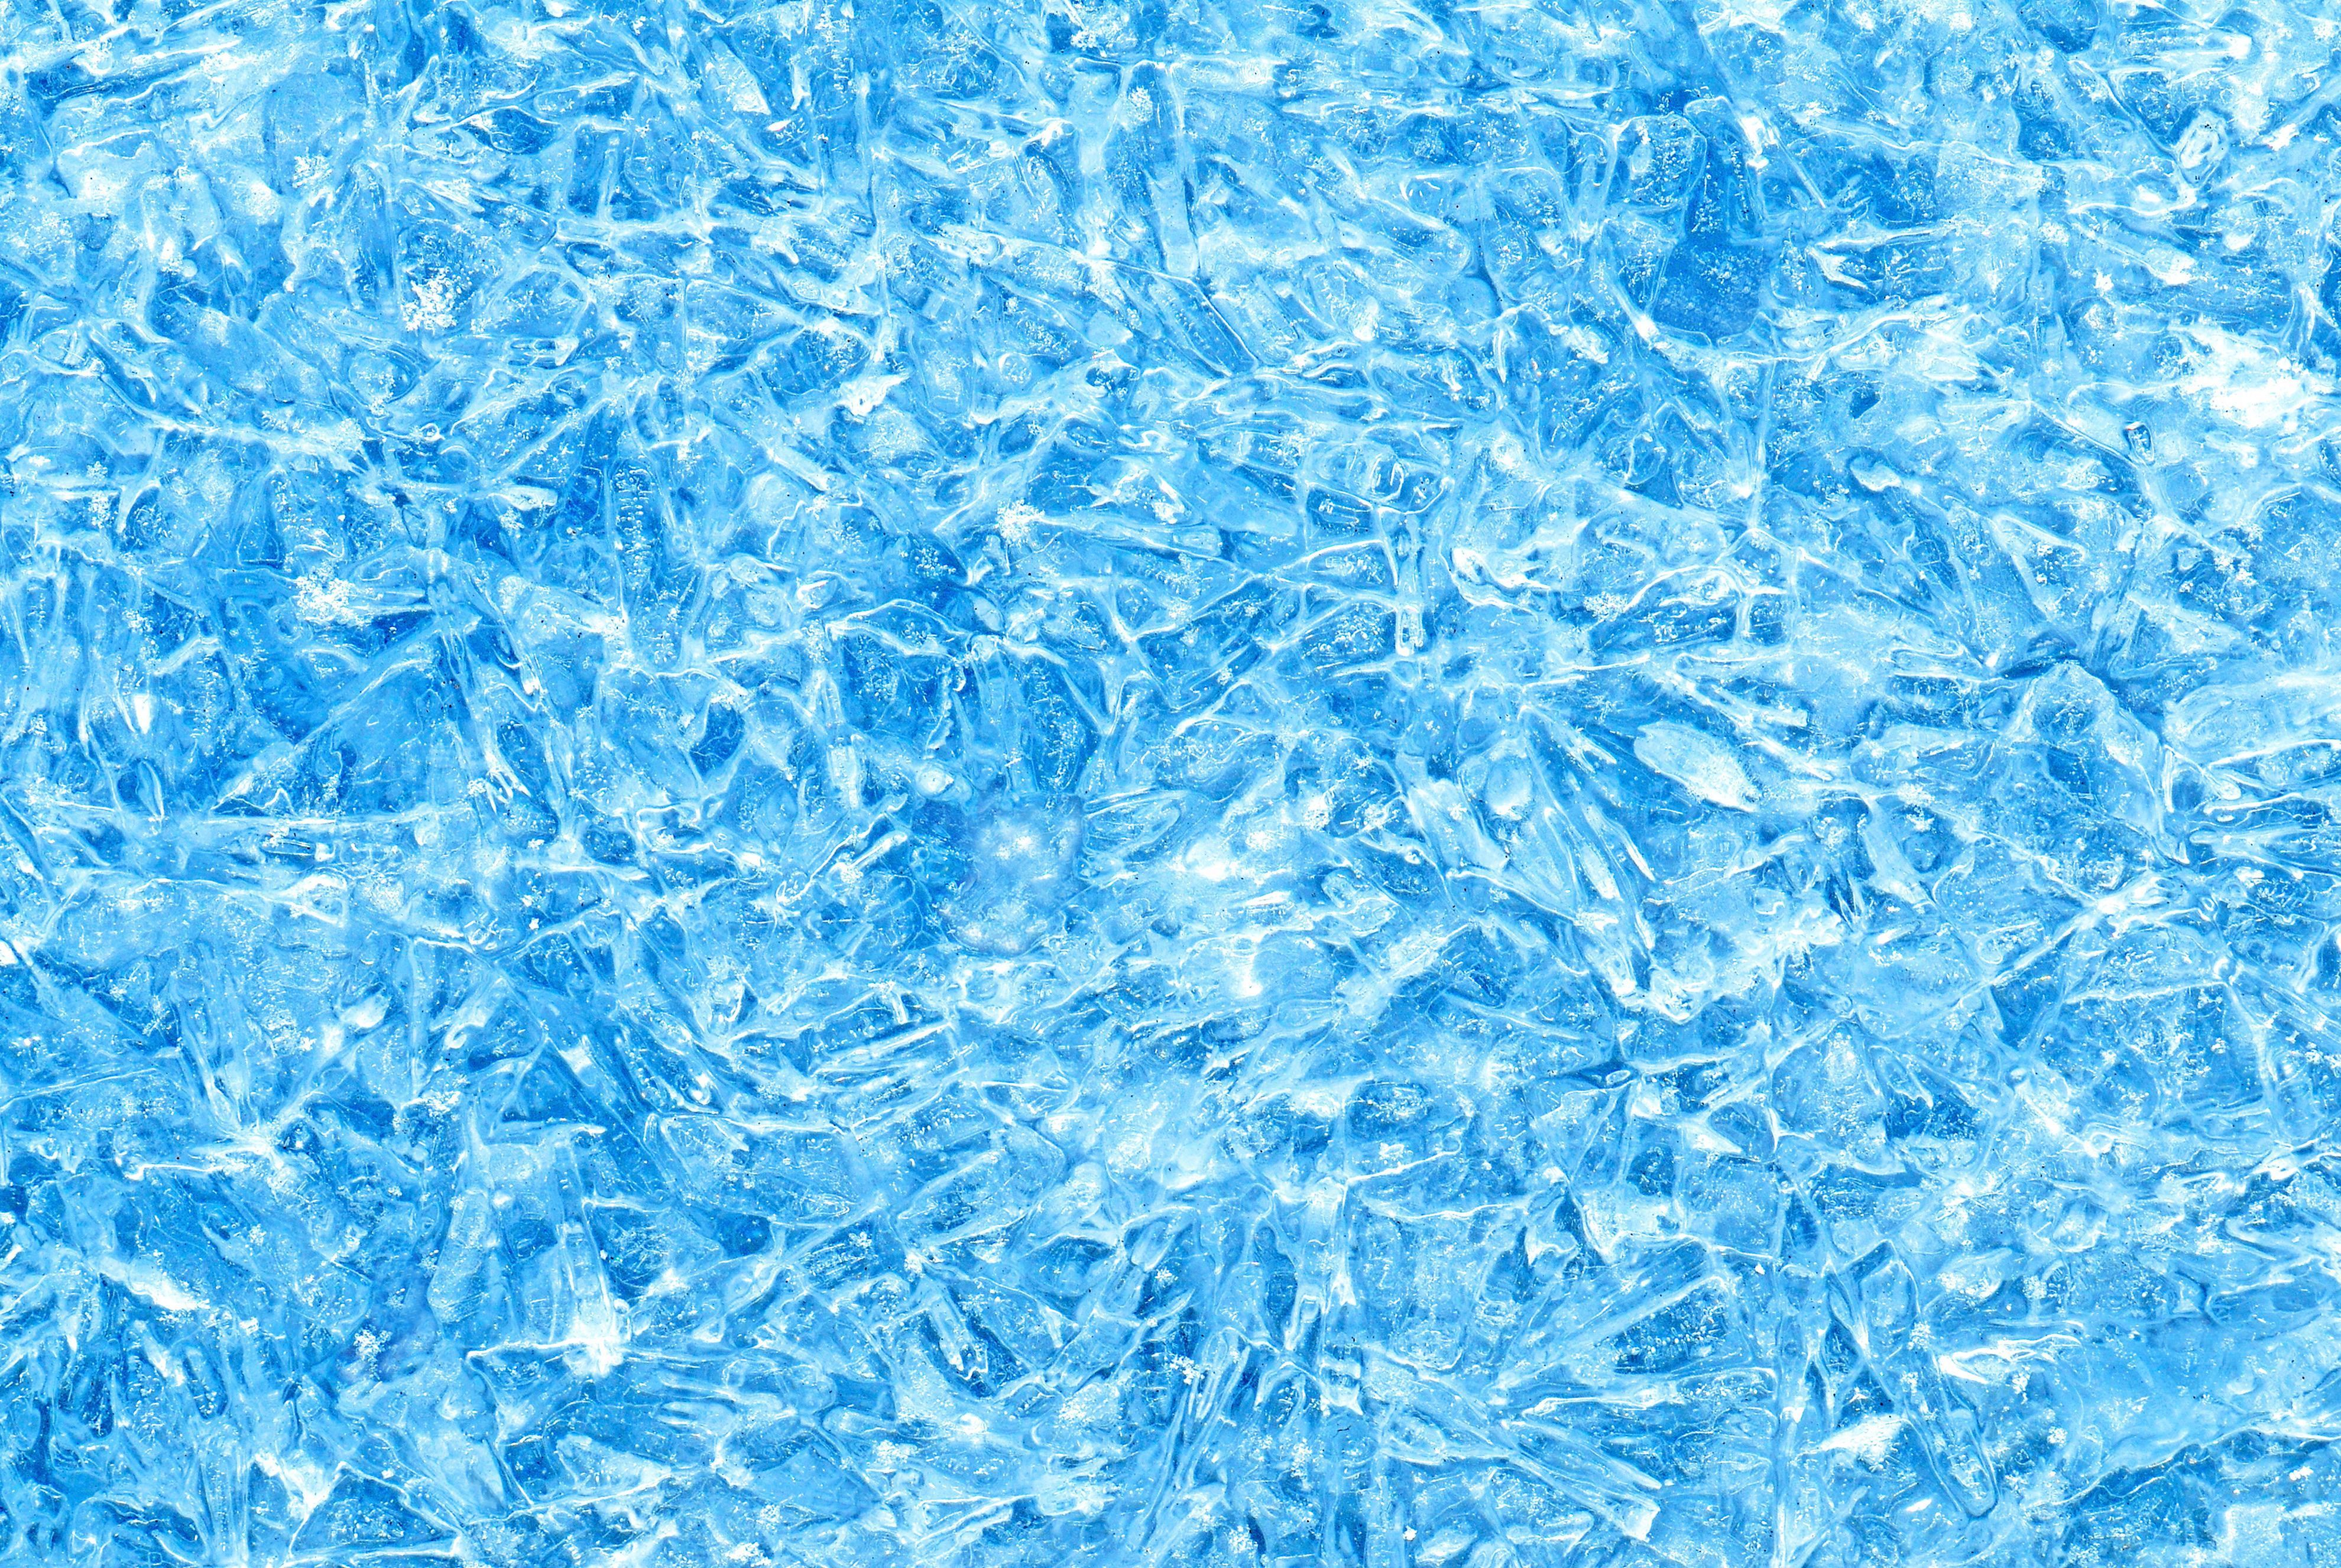 30 Free Ice Texture Backgrounds for Web Designers | Tech-Lovers l ...